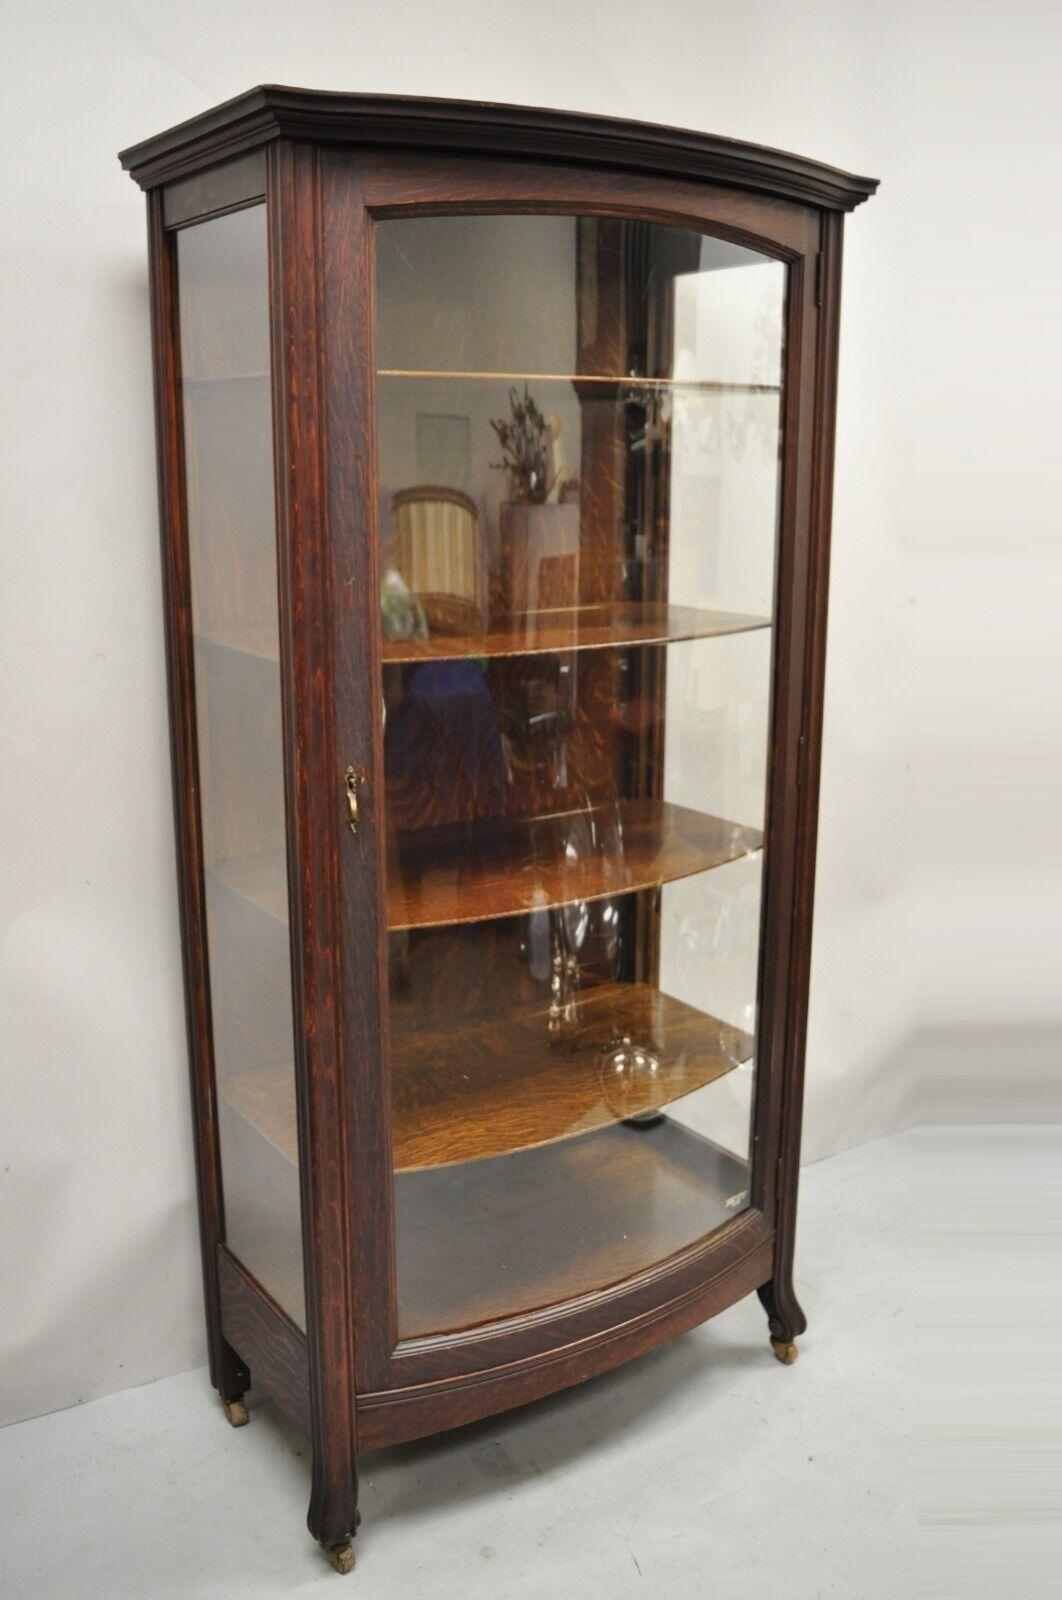 Antique Mission Oak Arts & Crafts bowed front China Display cabinet Curio. Item features front door with bowed plexiglass panel, side panels are glass, rolling casters, beautiful wood grain, 4 adjustable shelves, working lock and key, very nice